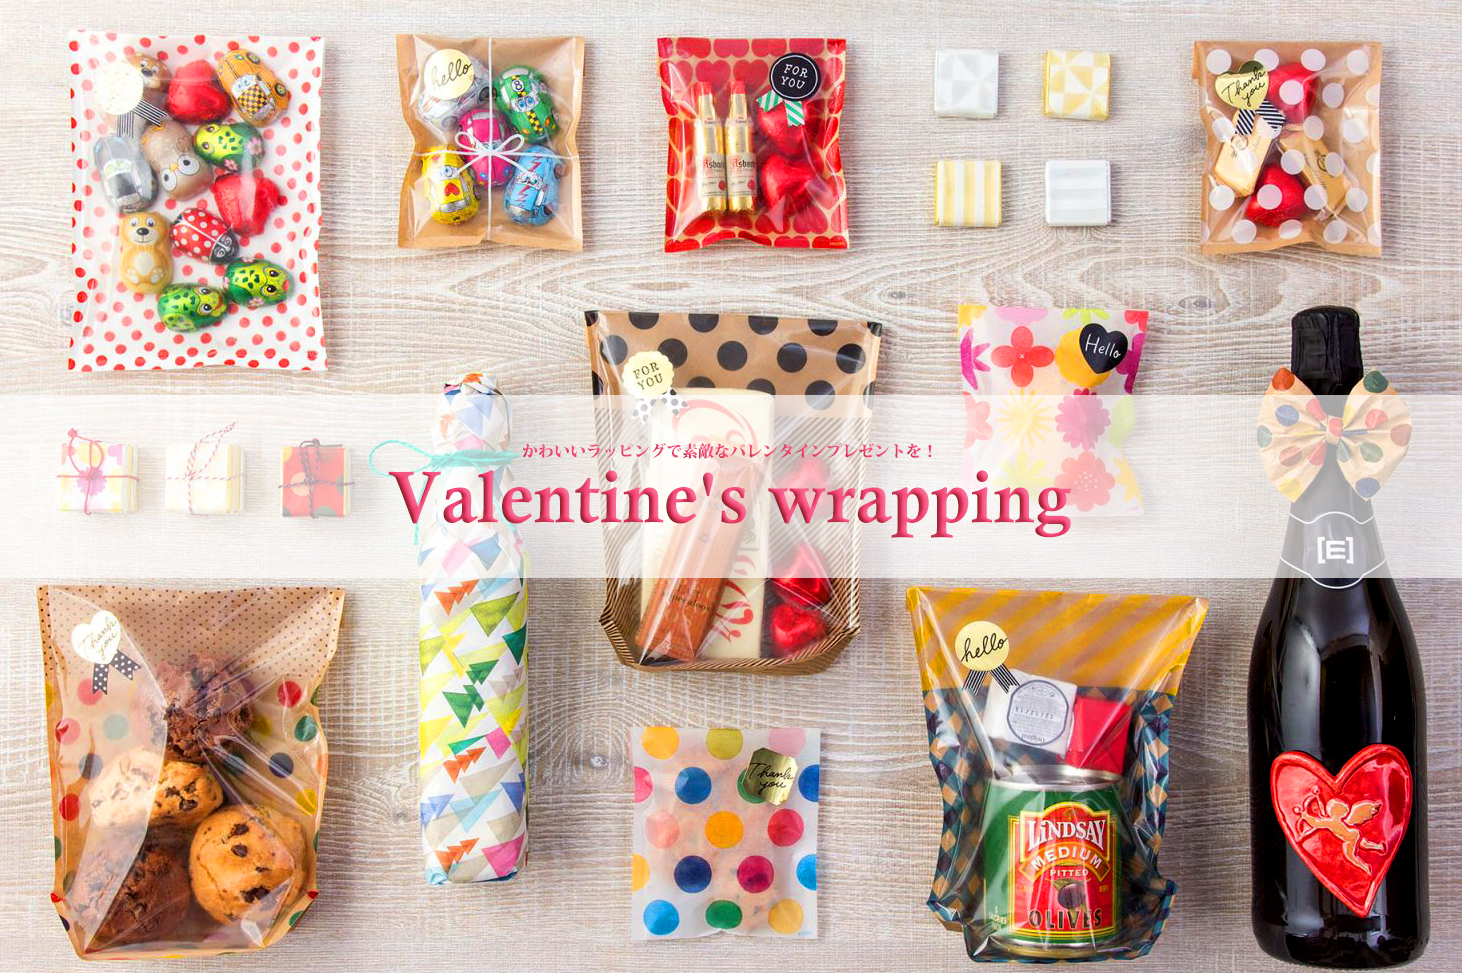 Valentine's wrapping